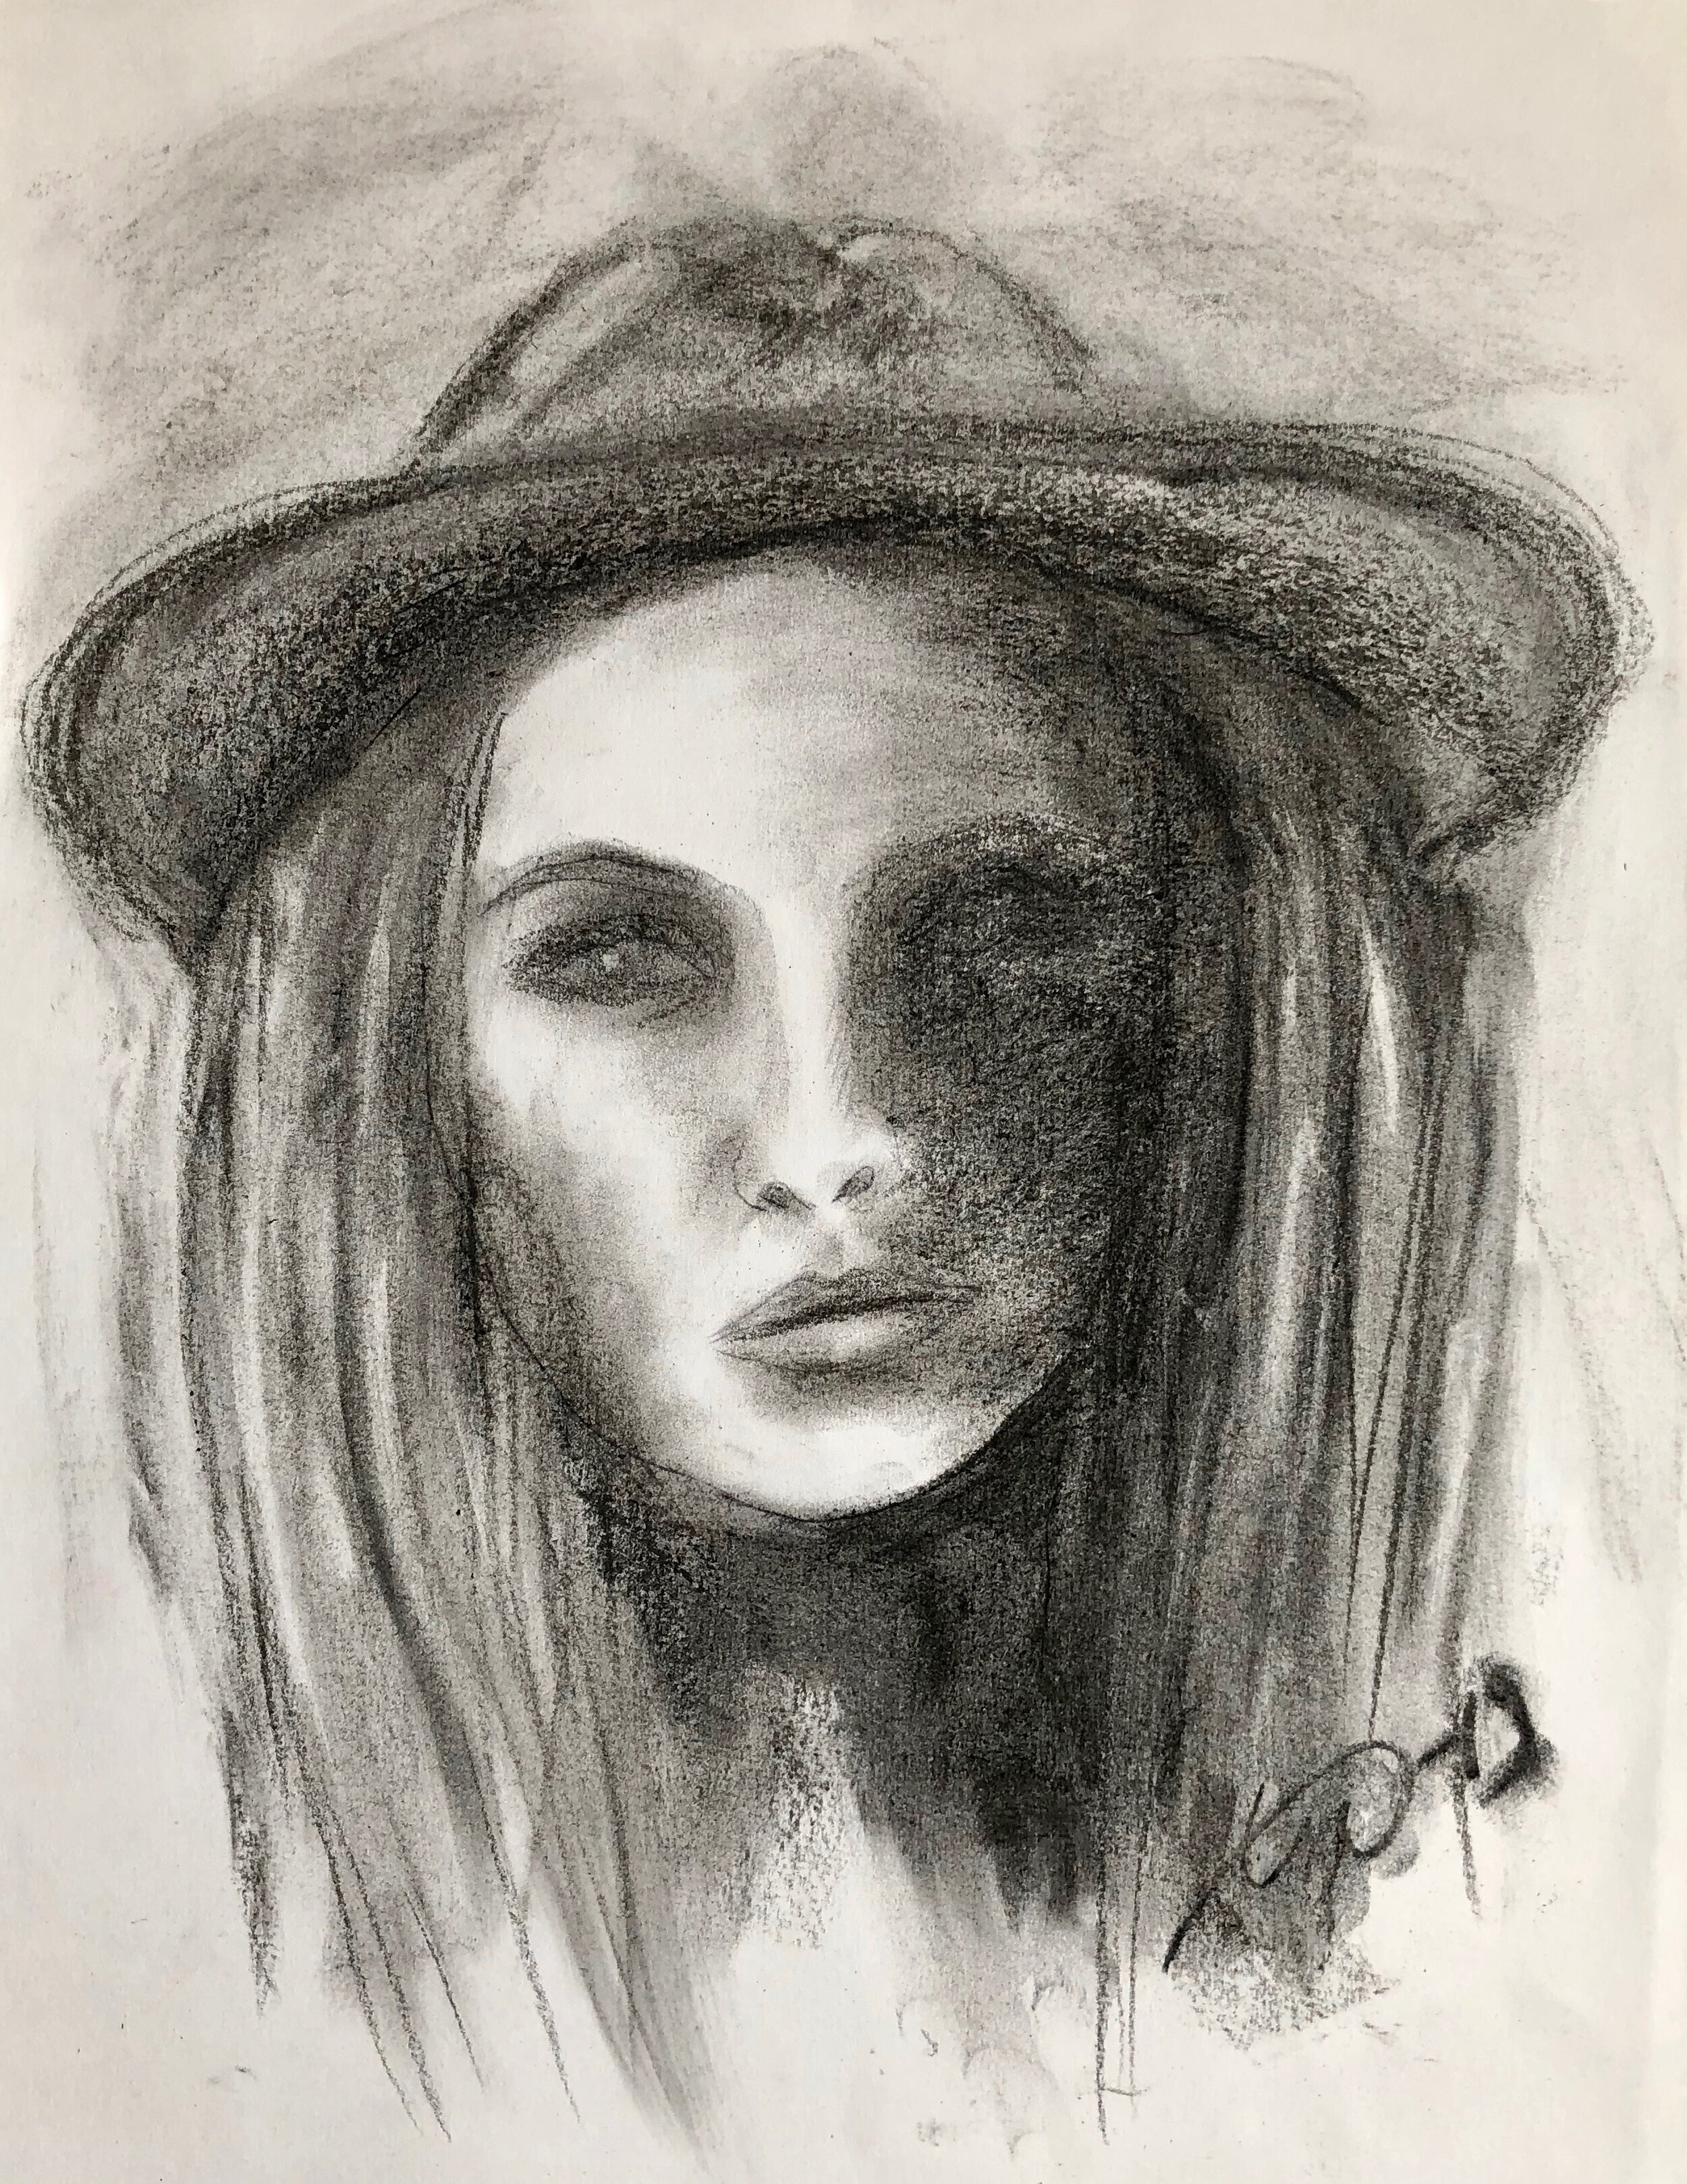  COVER GIRL, 2019, charcoal on paper, 48x36cm 